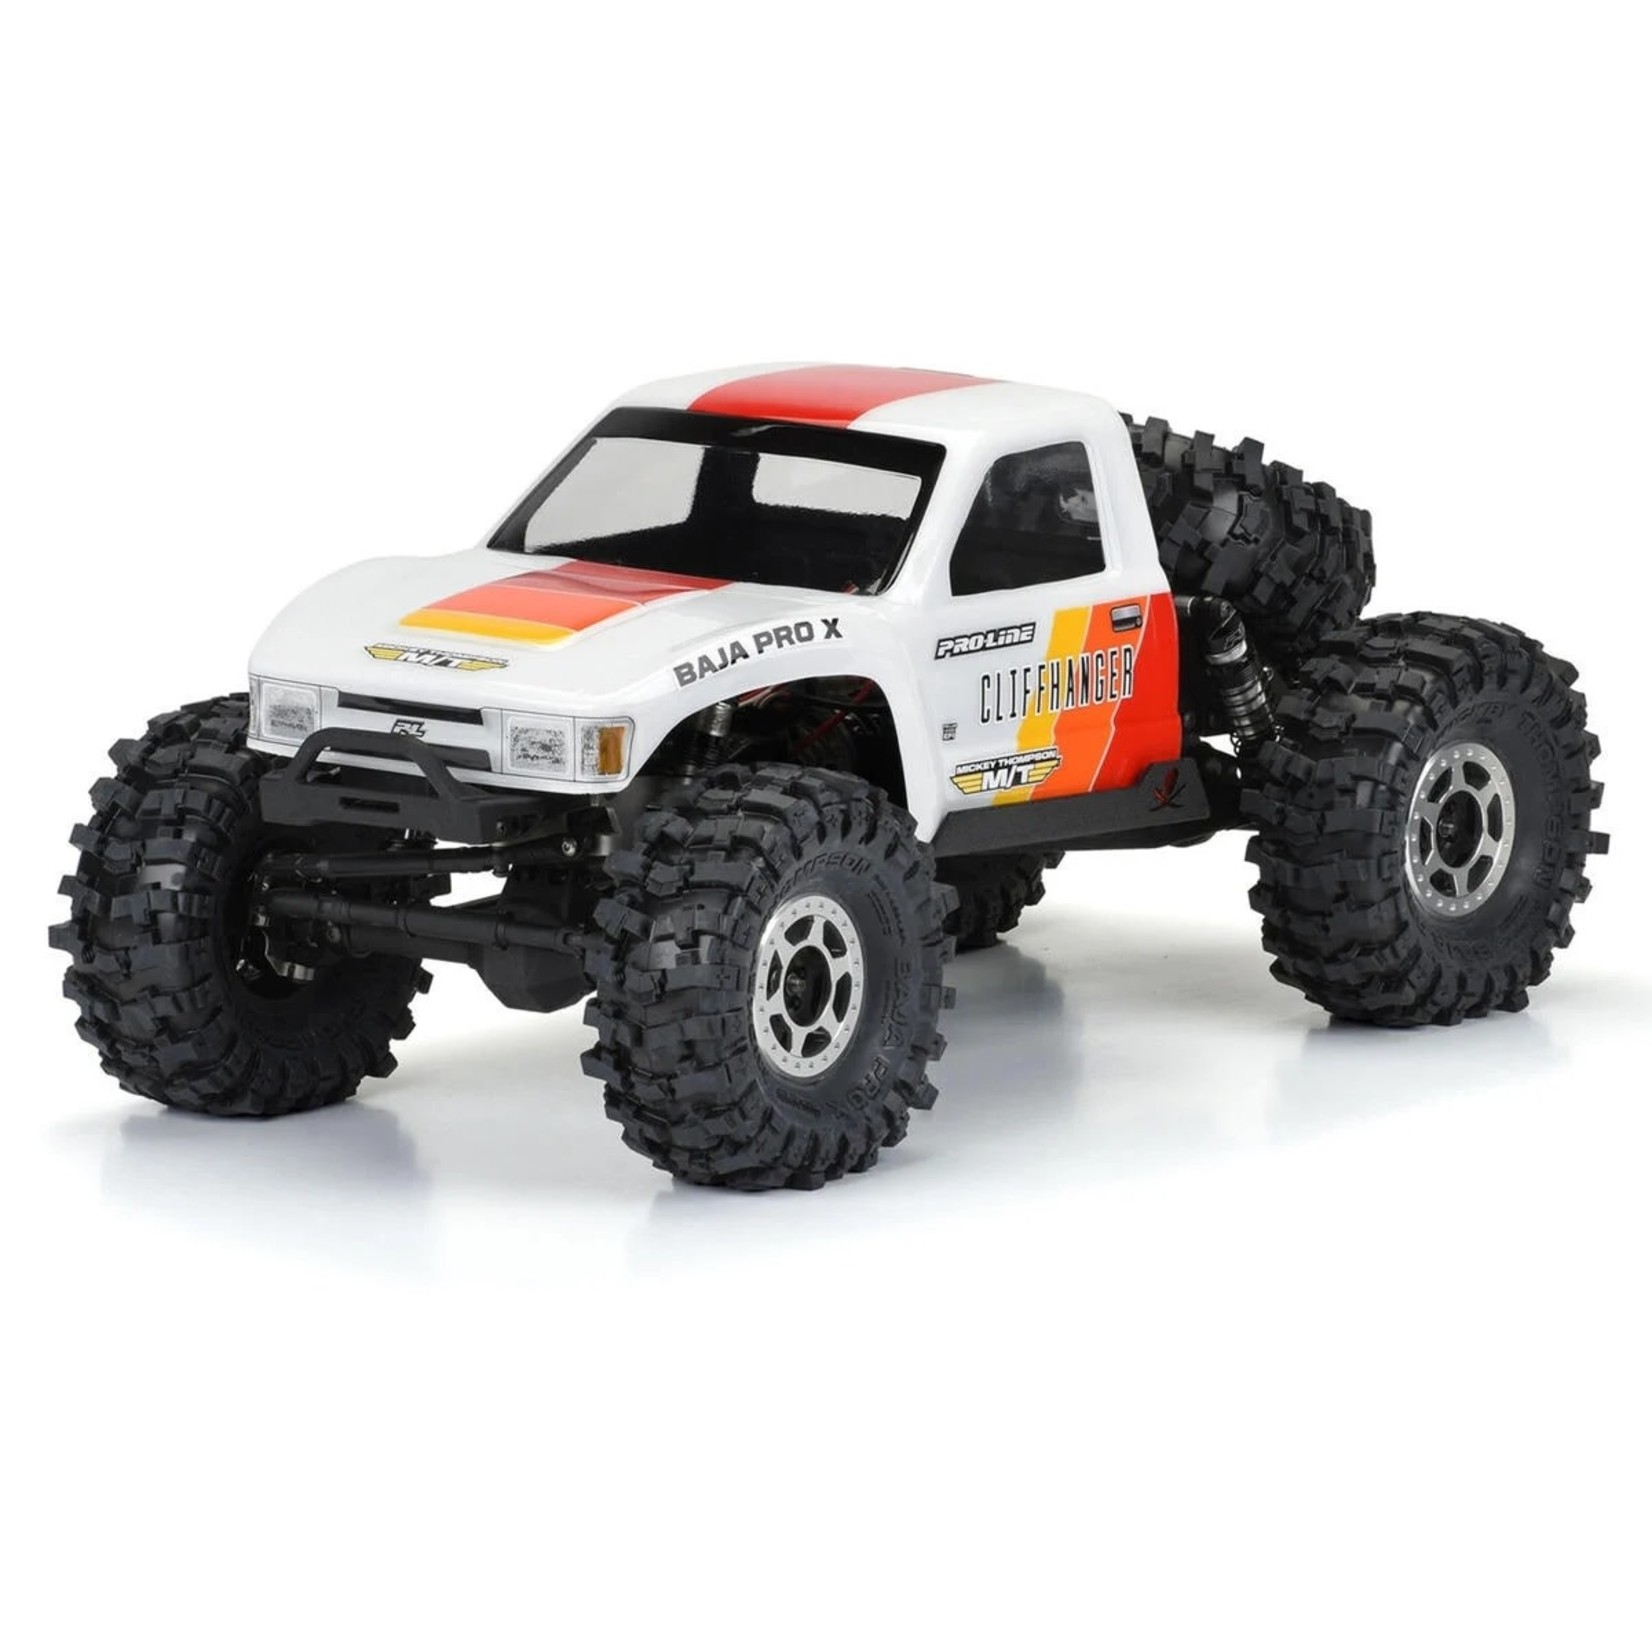 Pro-Line Pro-Line Cliffhanger HP 1/10 Cab Only 12.3" Comp Crawler Body (Clear) #3615-00